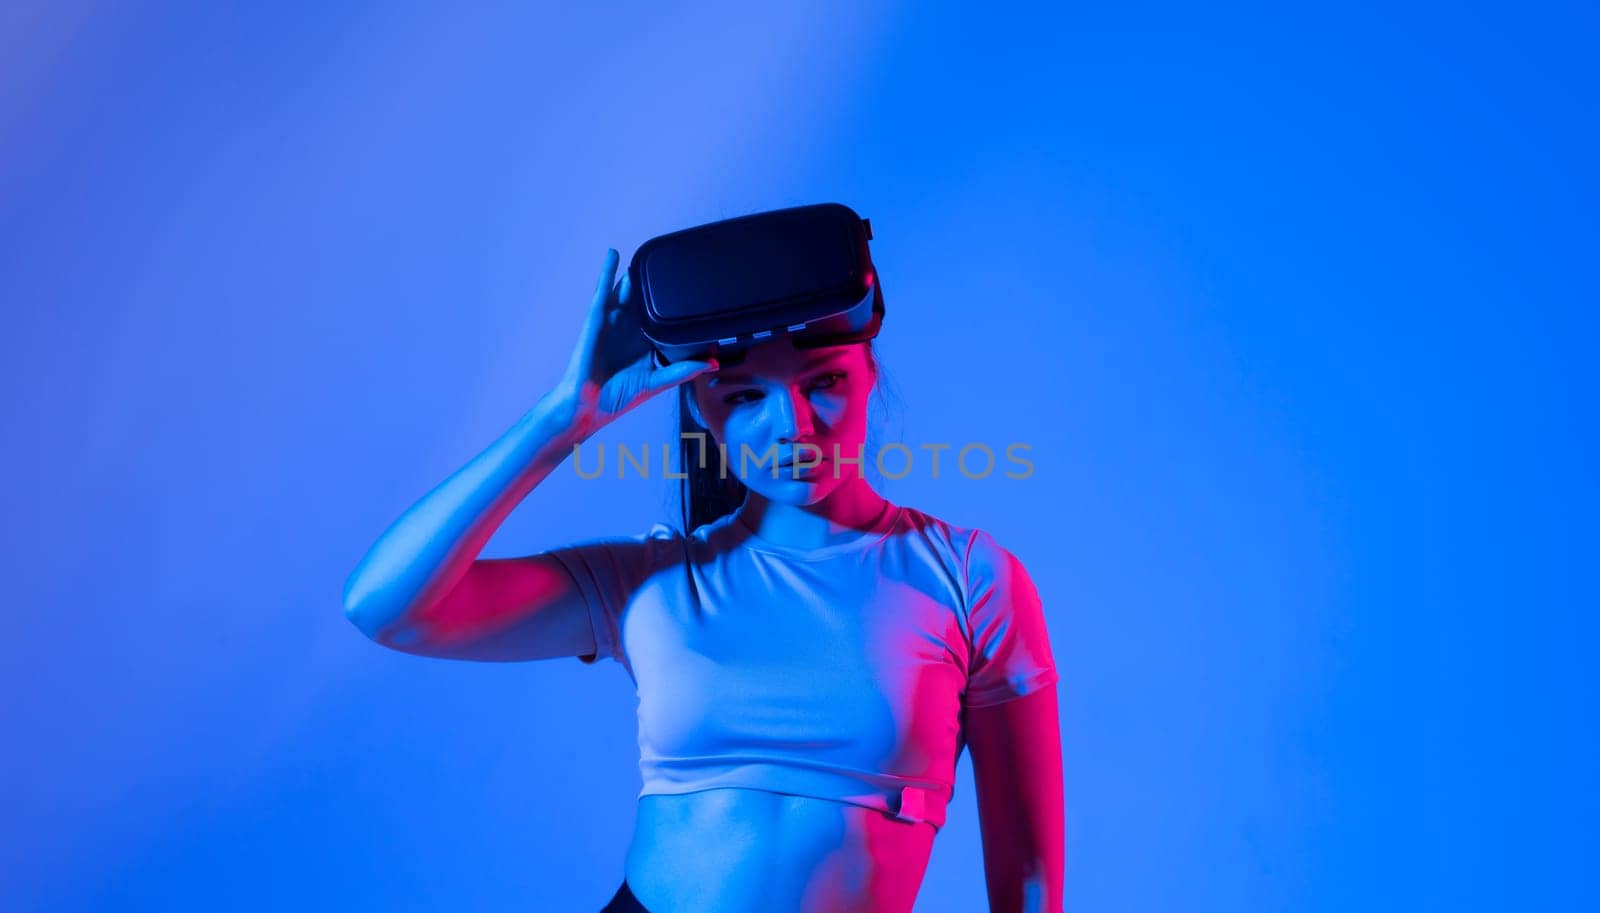 Portrait of brunette woman getting experience in metaverse using VR headset glasses. Exploring a cyberspace via virtual reality